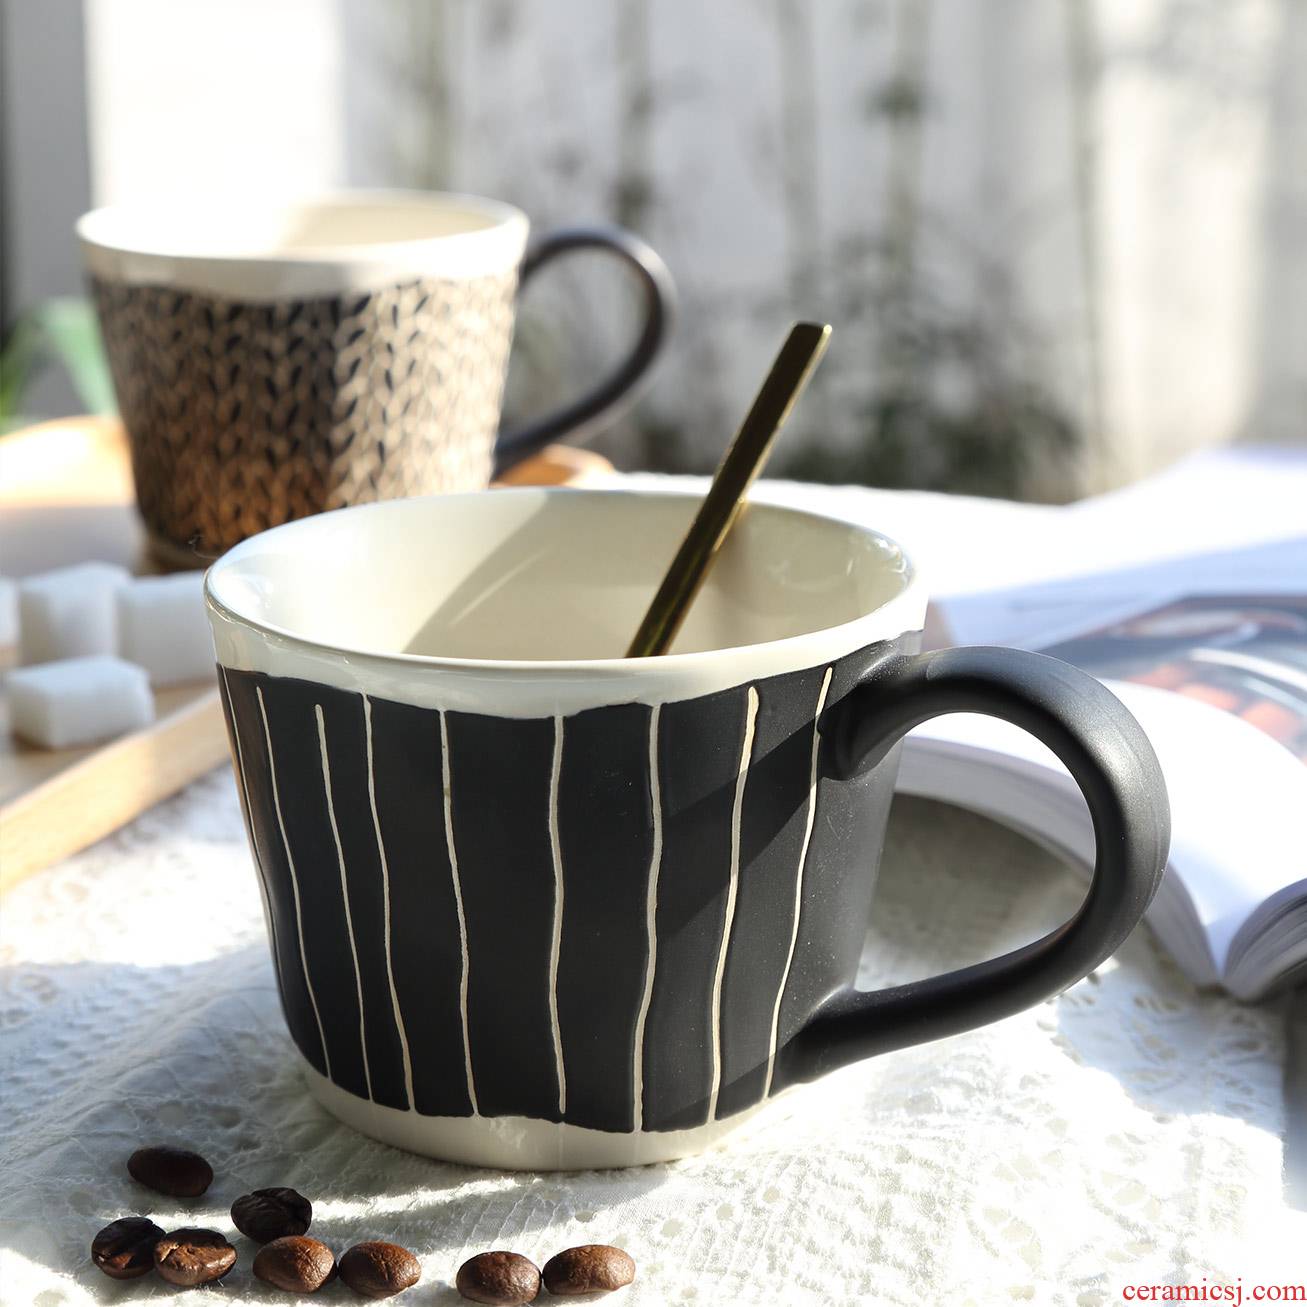 Ceramic cup Europe type under the glaze color glass creative household keller cup milk cup grain coffee cup